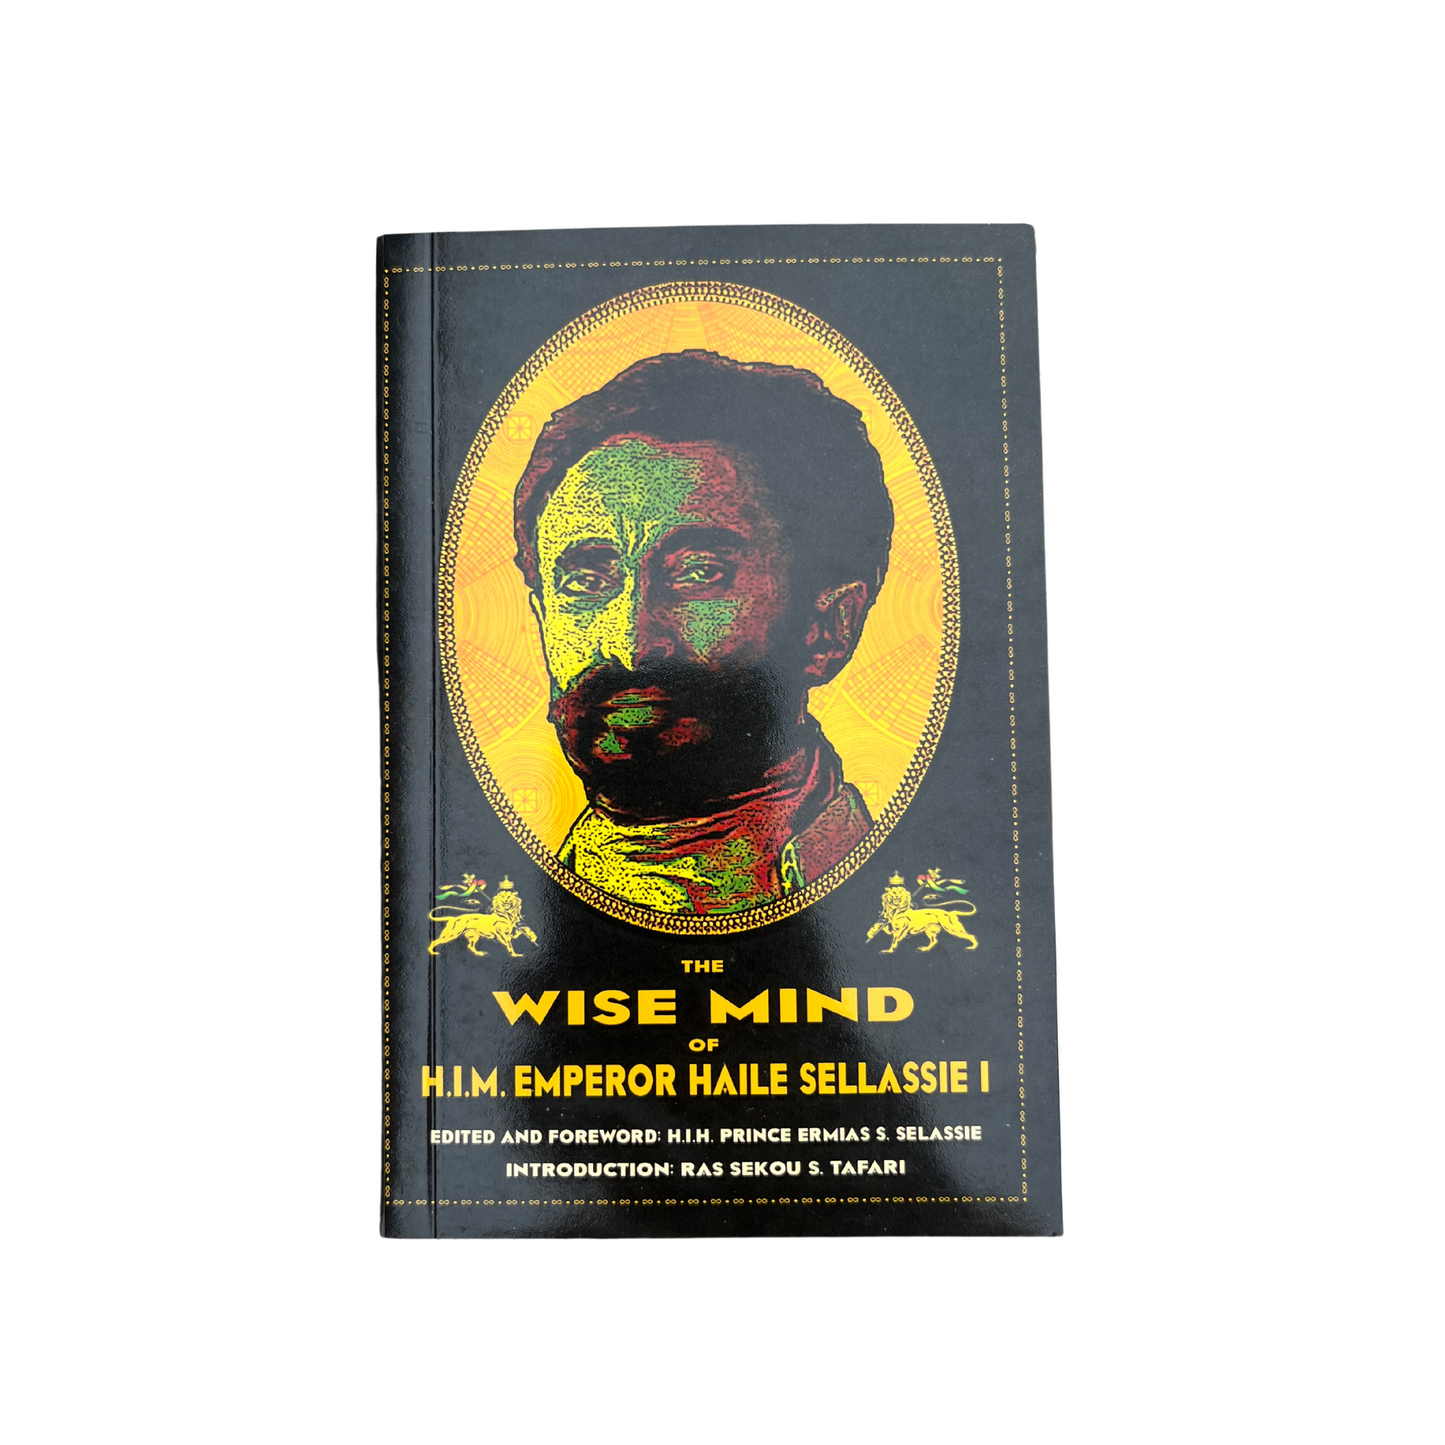 The Wise Mind of H.I.M. Emperor Haile Sellassie I